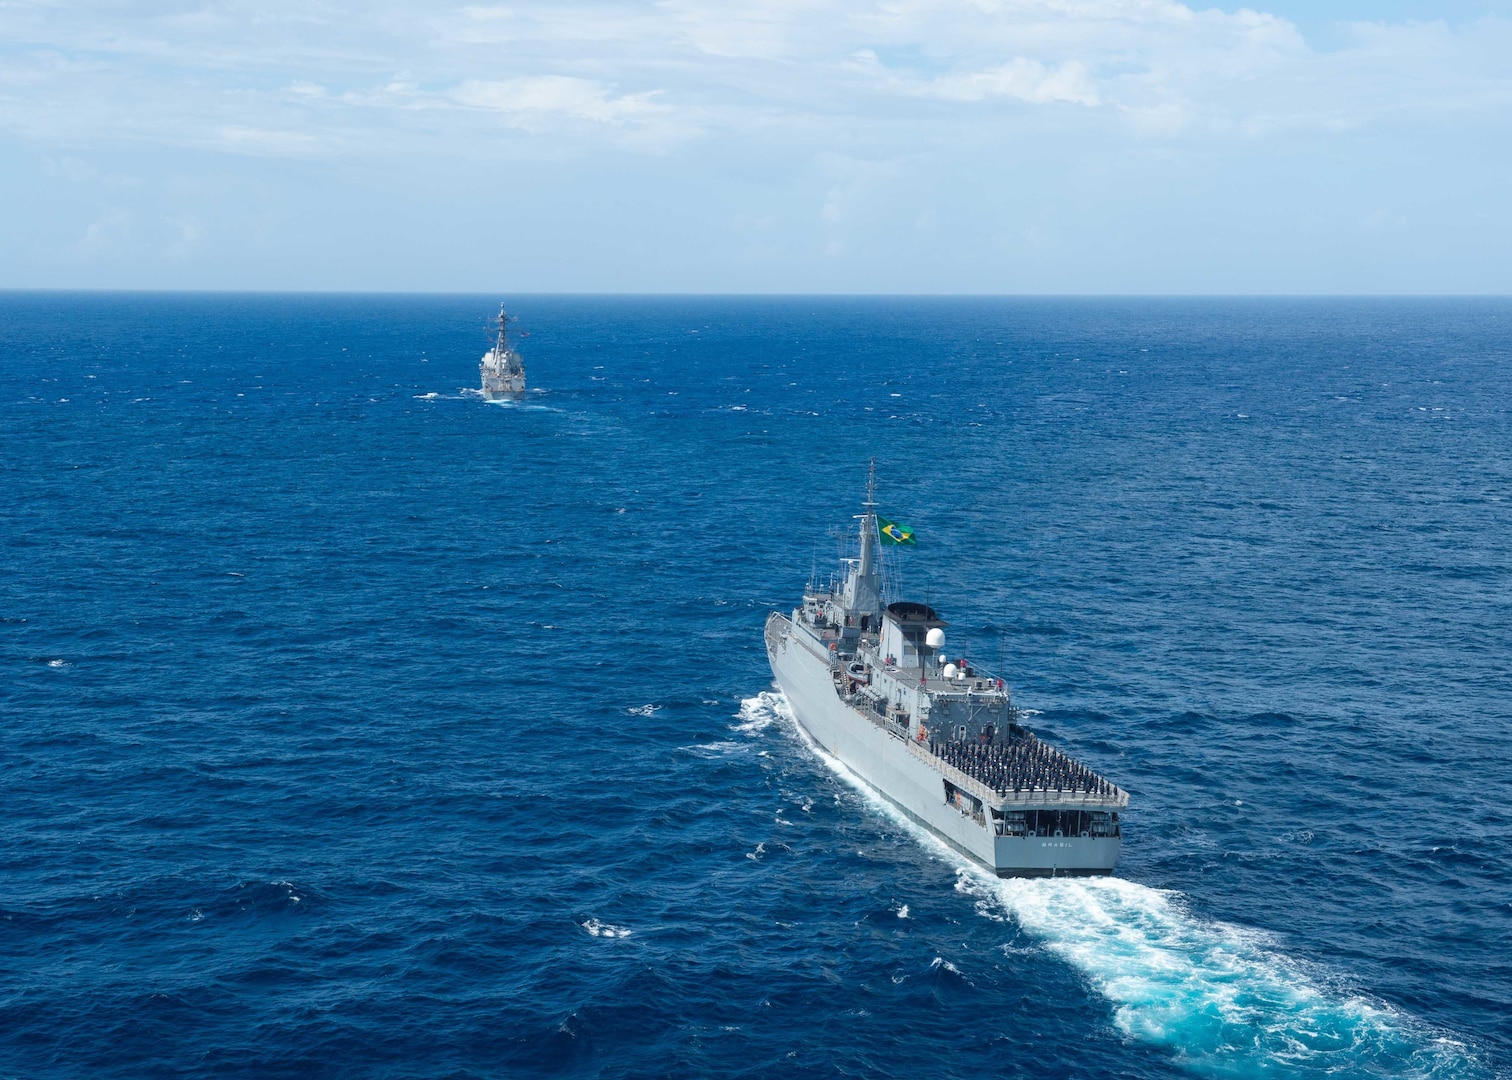 USS William P. Lawrence (DDG 110) and the Brazilian navy training ship BNS Brasil (U 27) conduct a passing exercise.